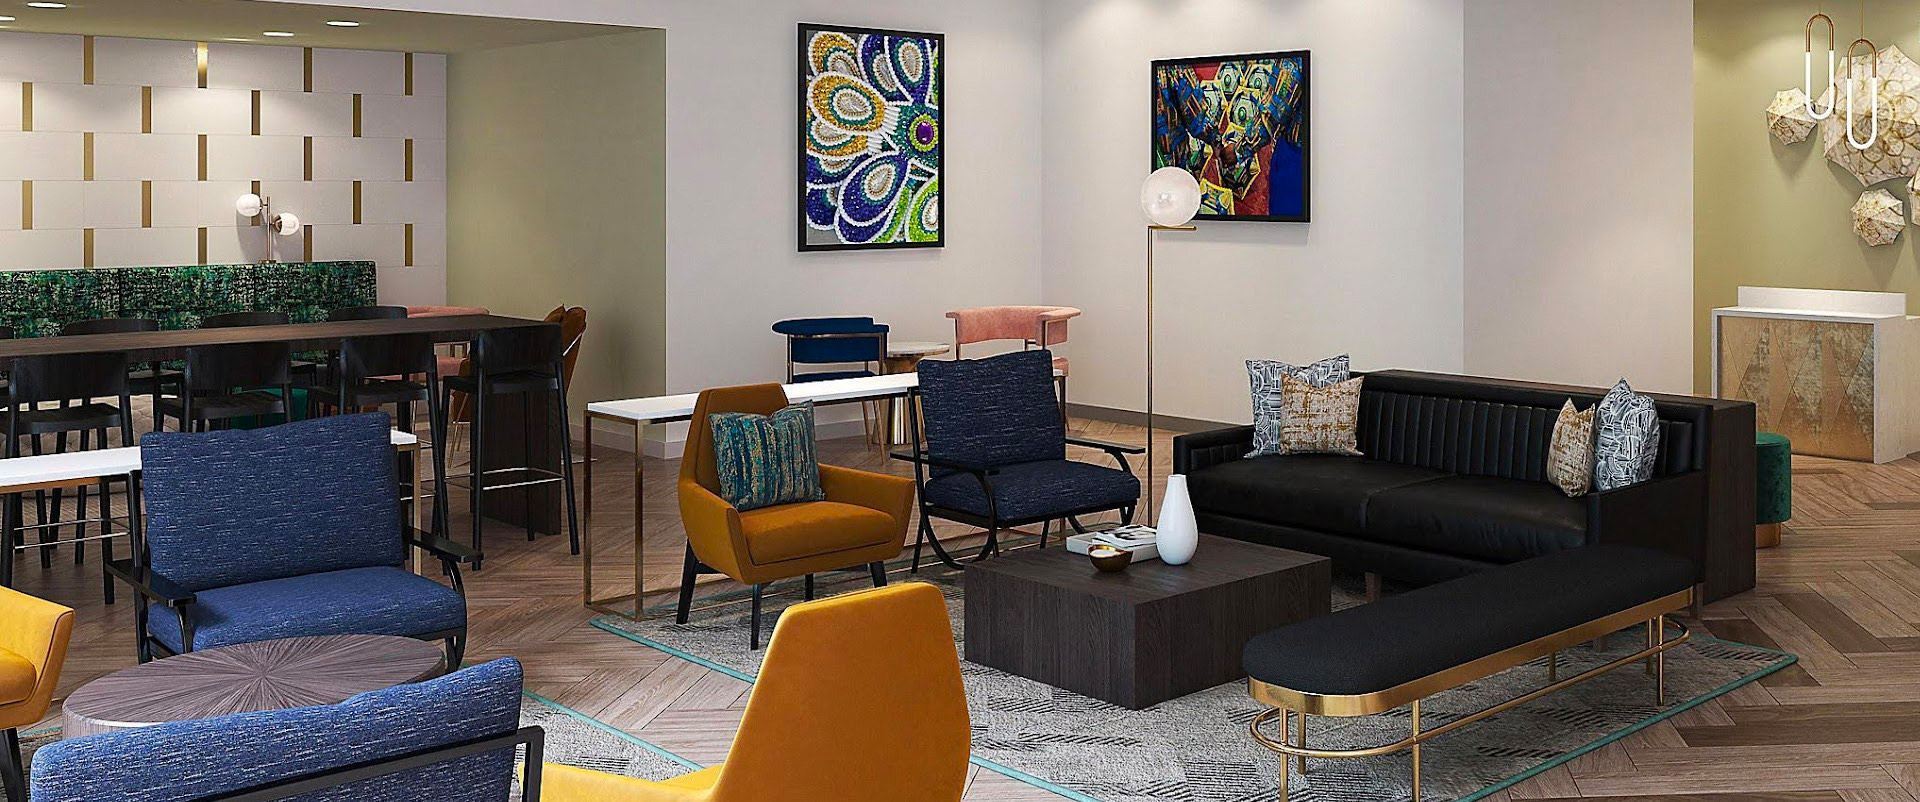 view of lobby with mid centry modern furniture sofa and chairs and eclectic art